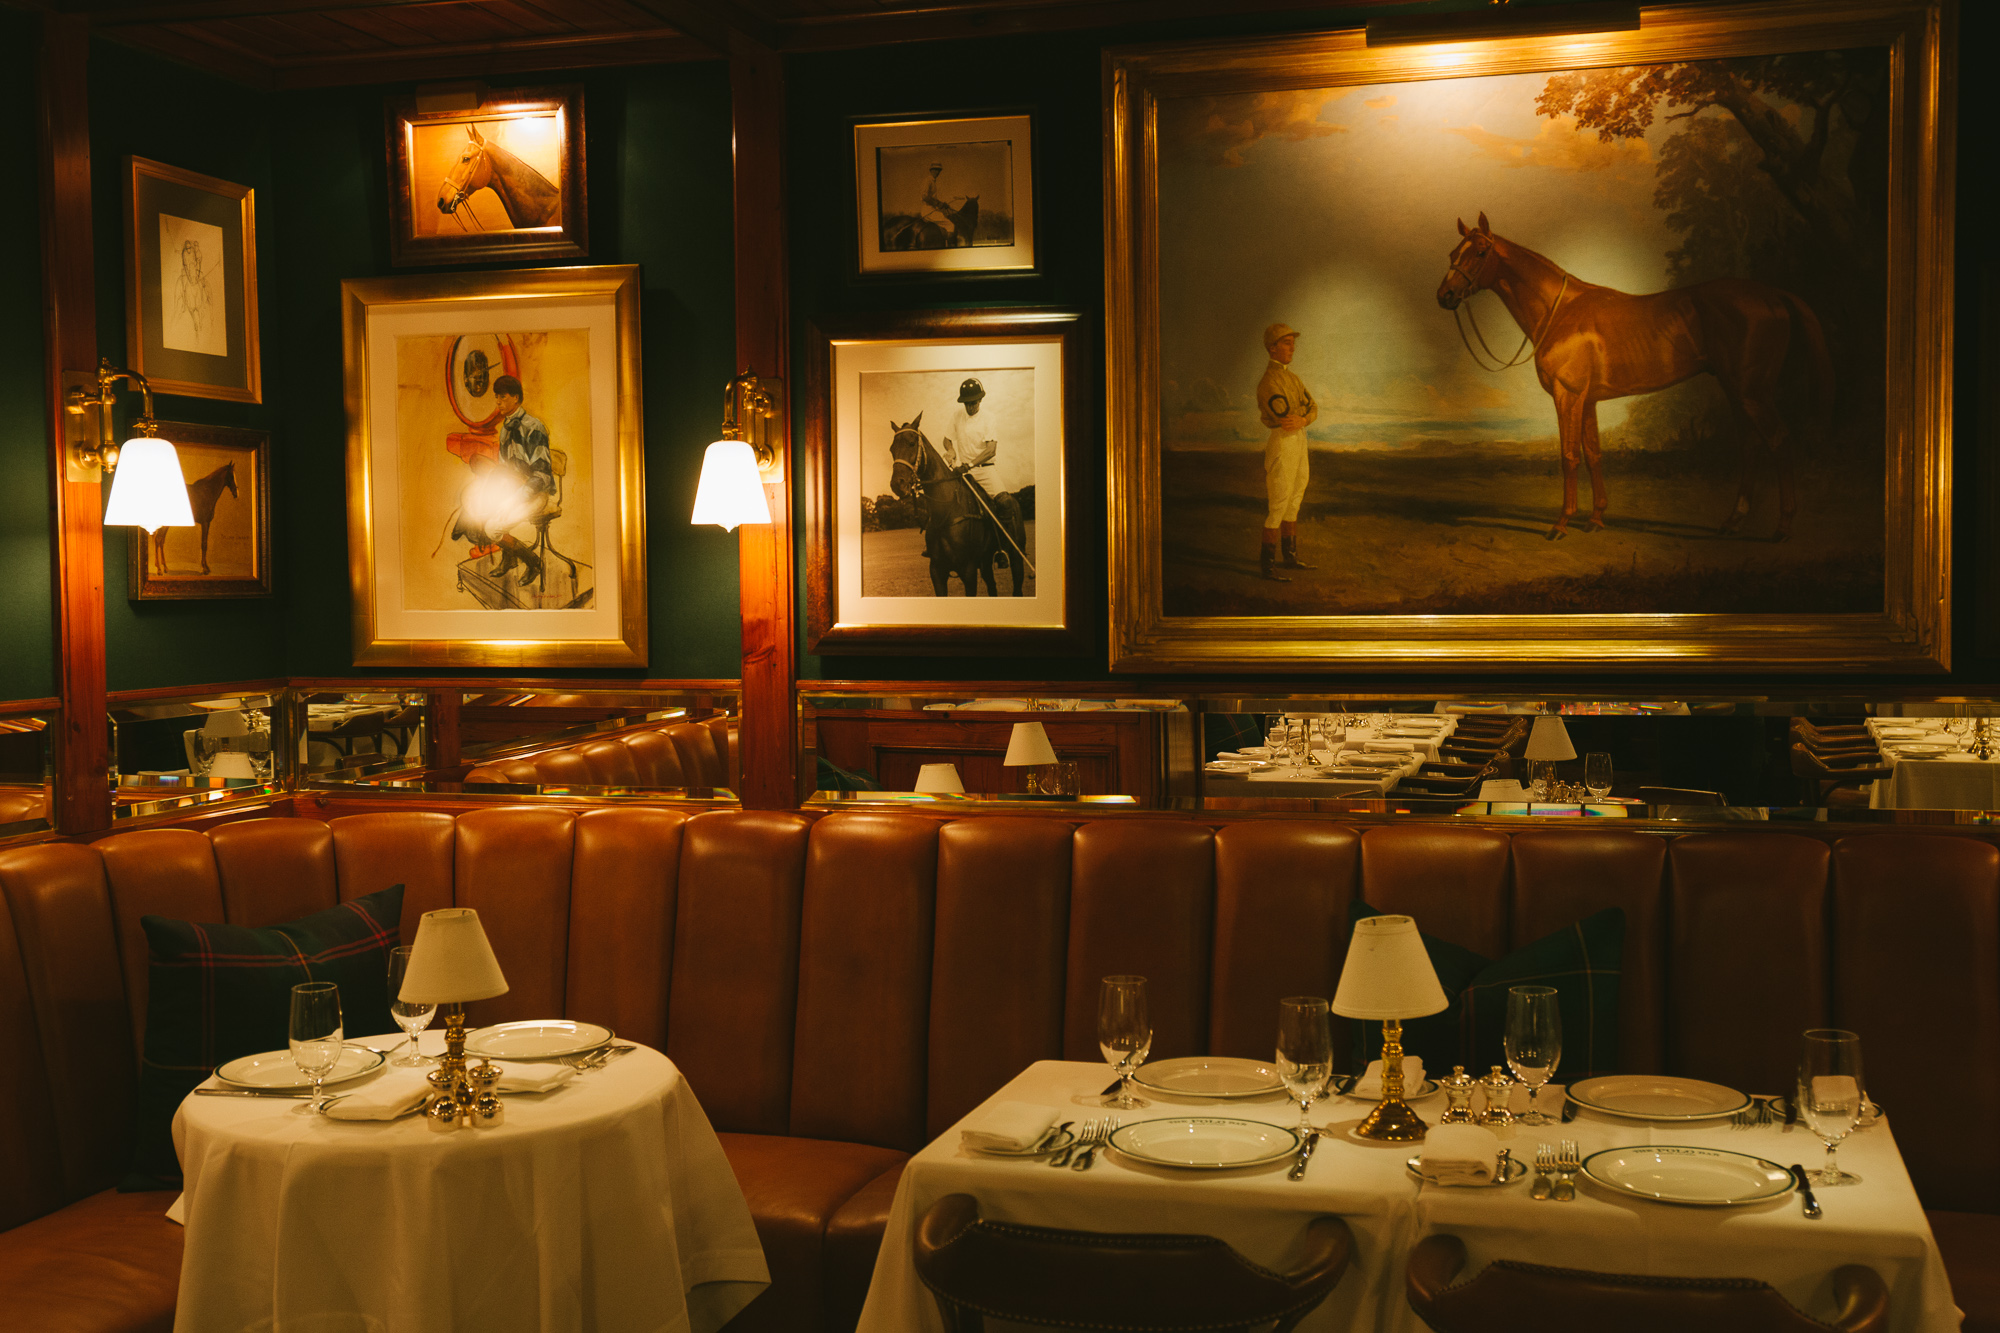 Ralph Lauren's @thepolobar is not only my favorite restaurant, but